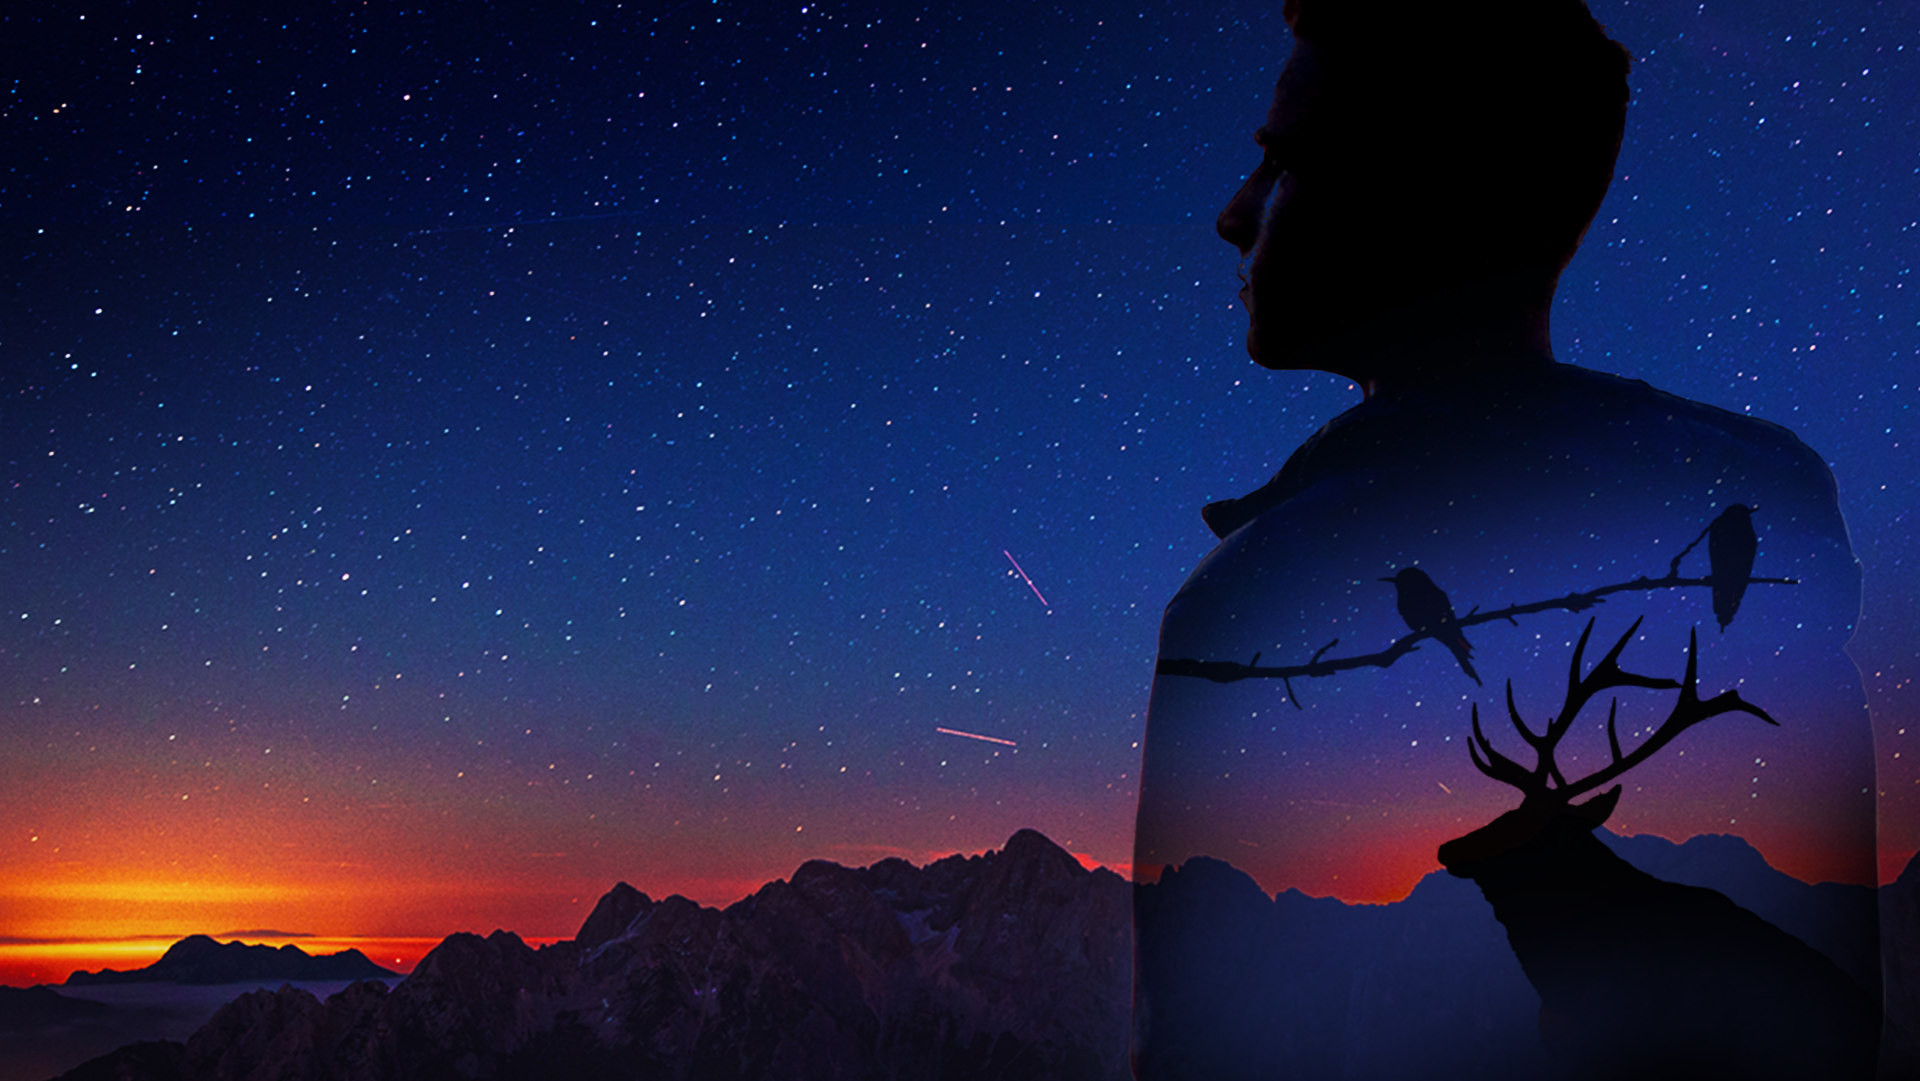 Background of a starry sky, hills, and to the right a silhouette of a man (within which there is the silhouette of a branch with birds and of a moose).